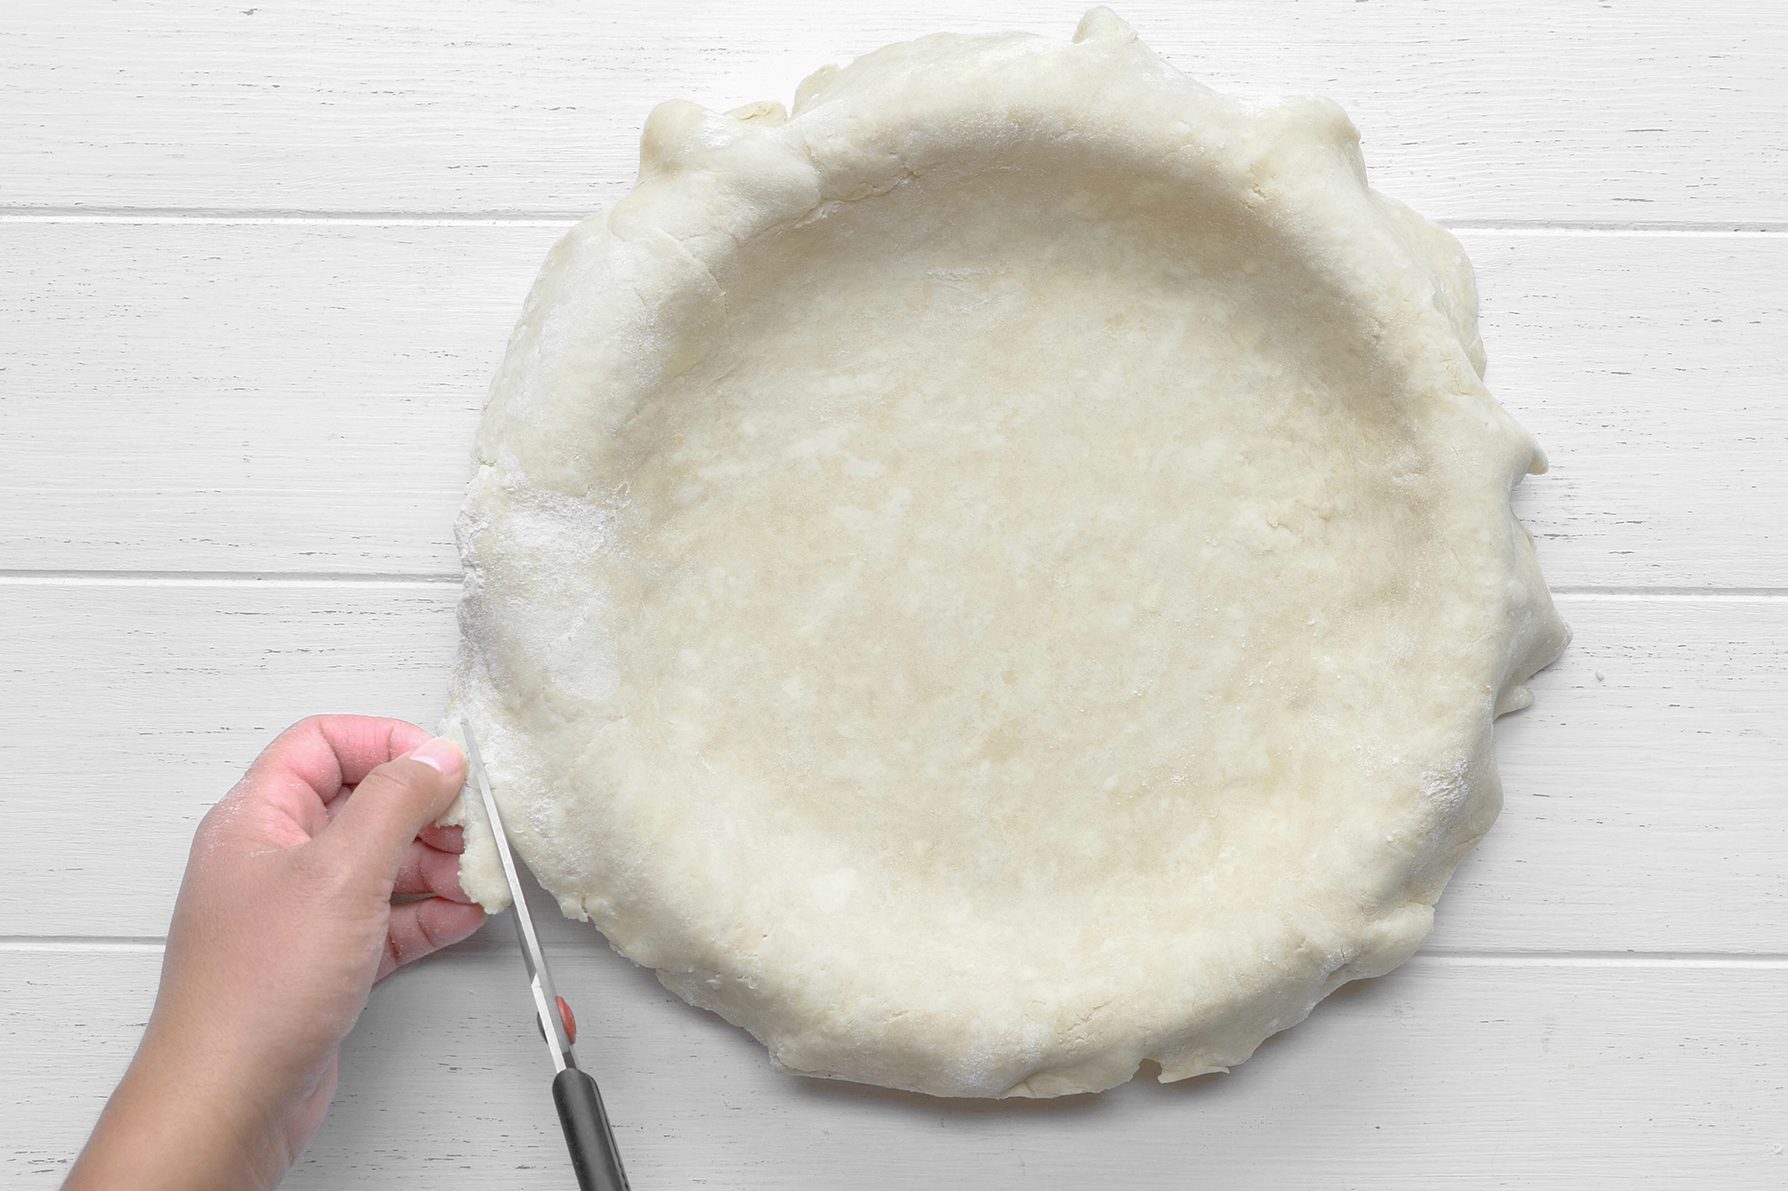 A person's hand is seen trimming the excess dough from the edge of an unbaked pie crust in a pie dish using a pair of scissors. 